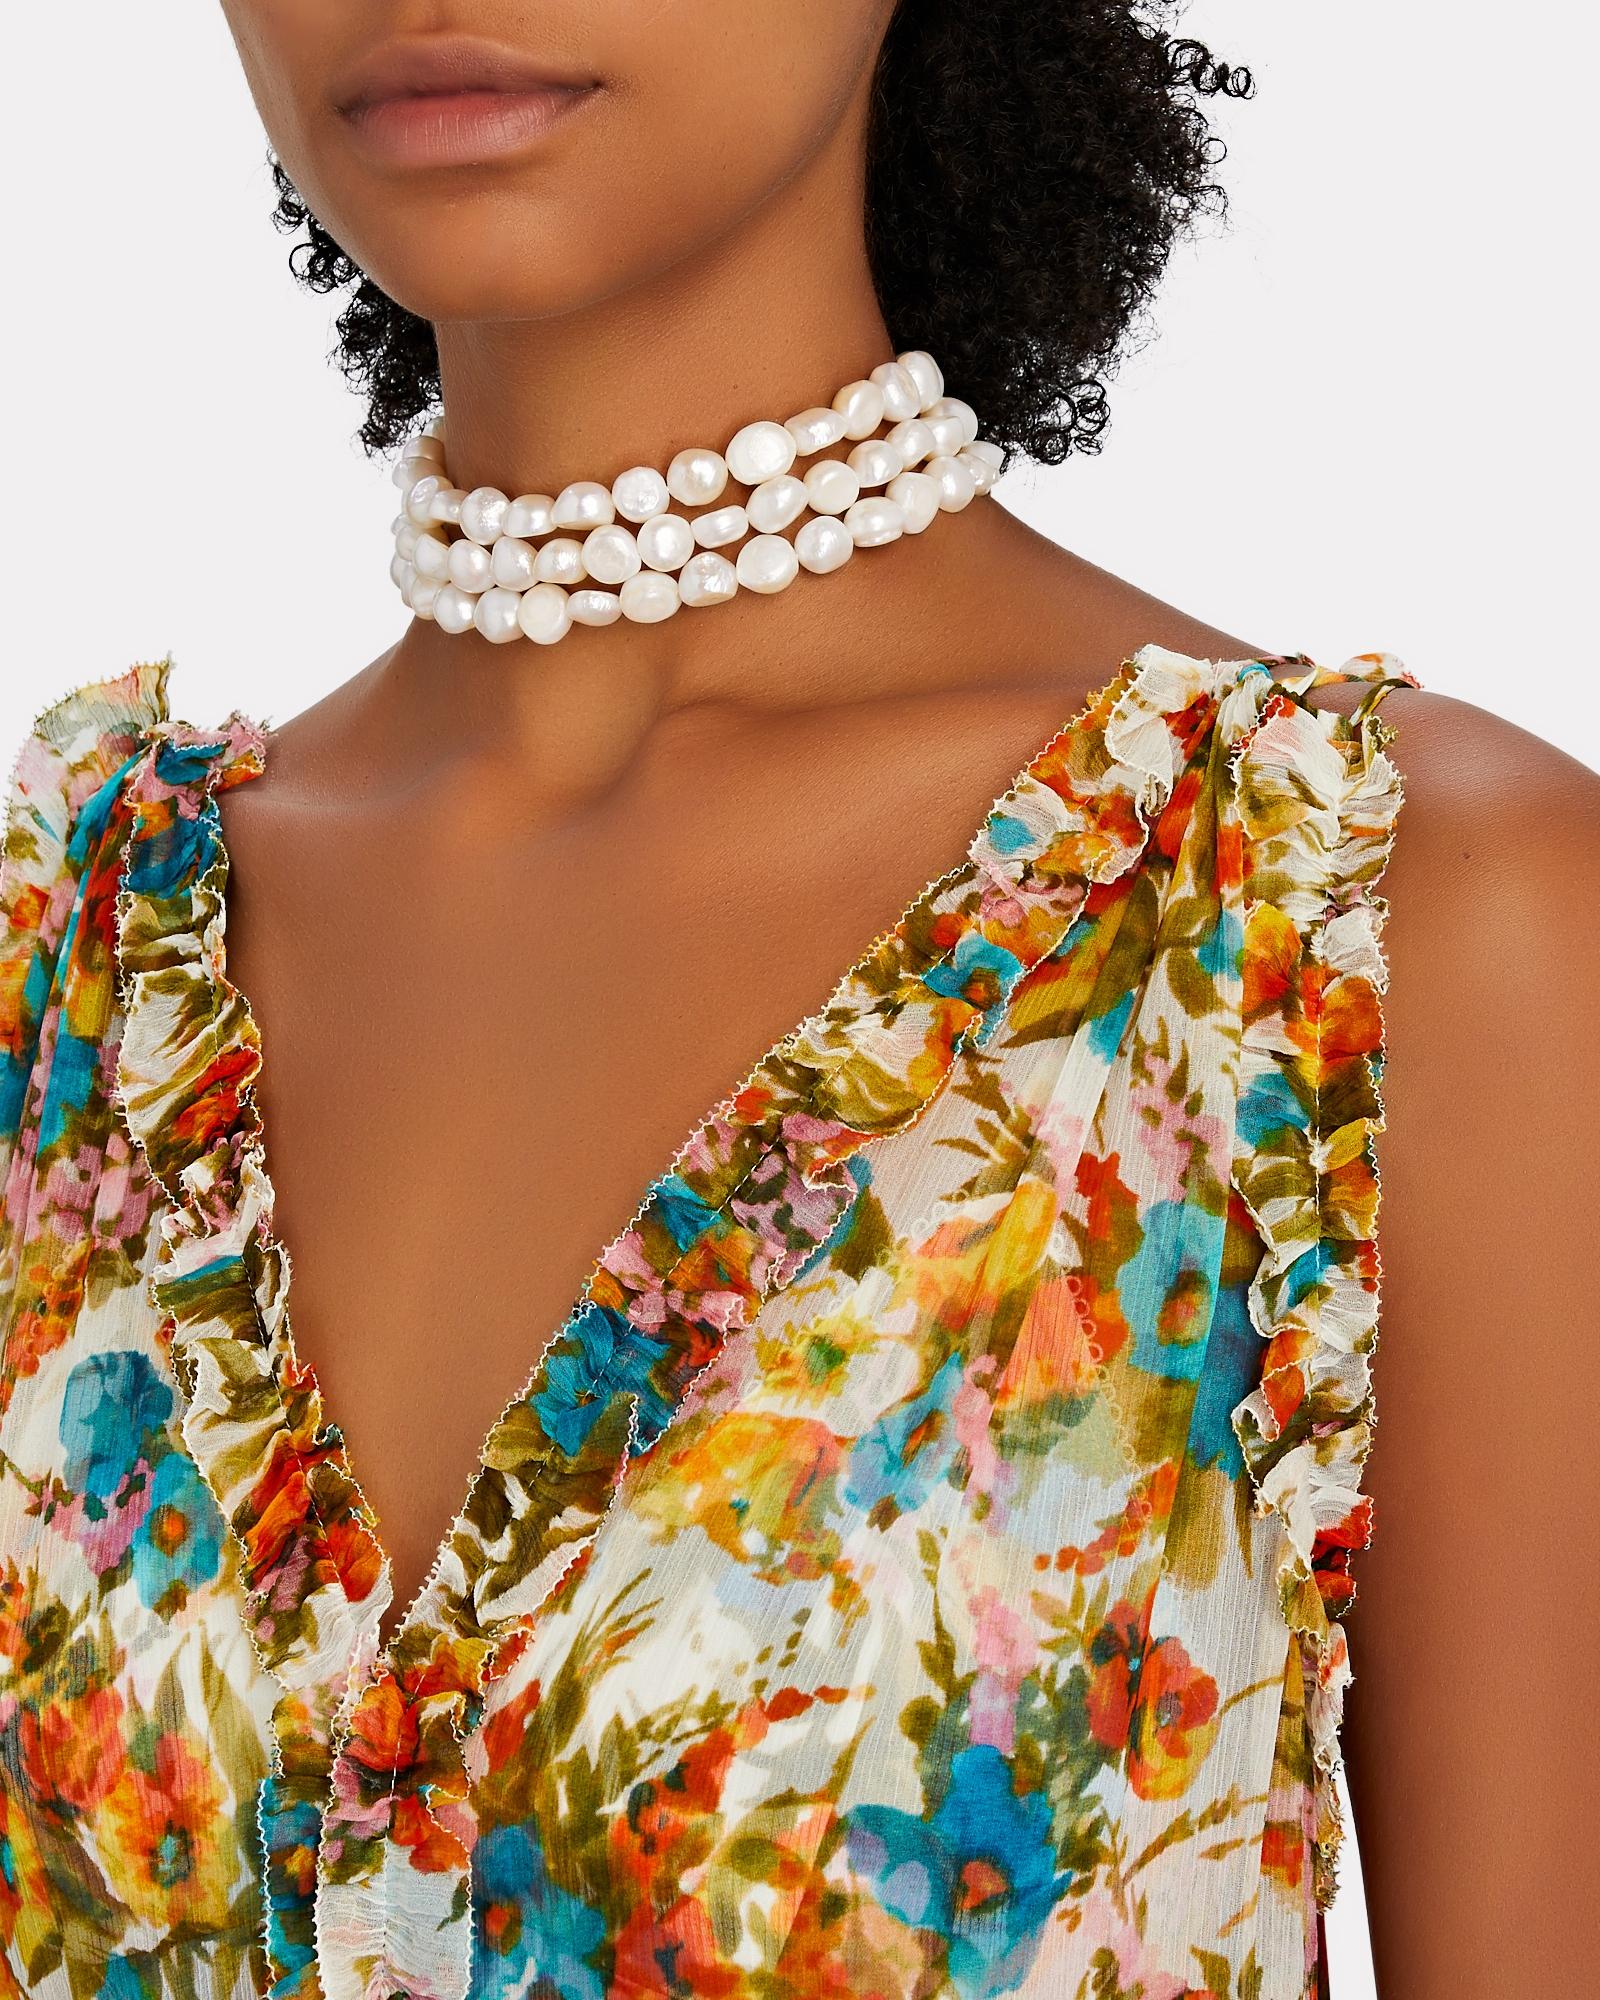 Cult Gaia Nora Pearl Choker Necklace in White | Lyst